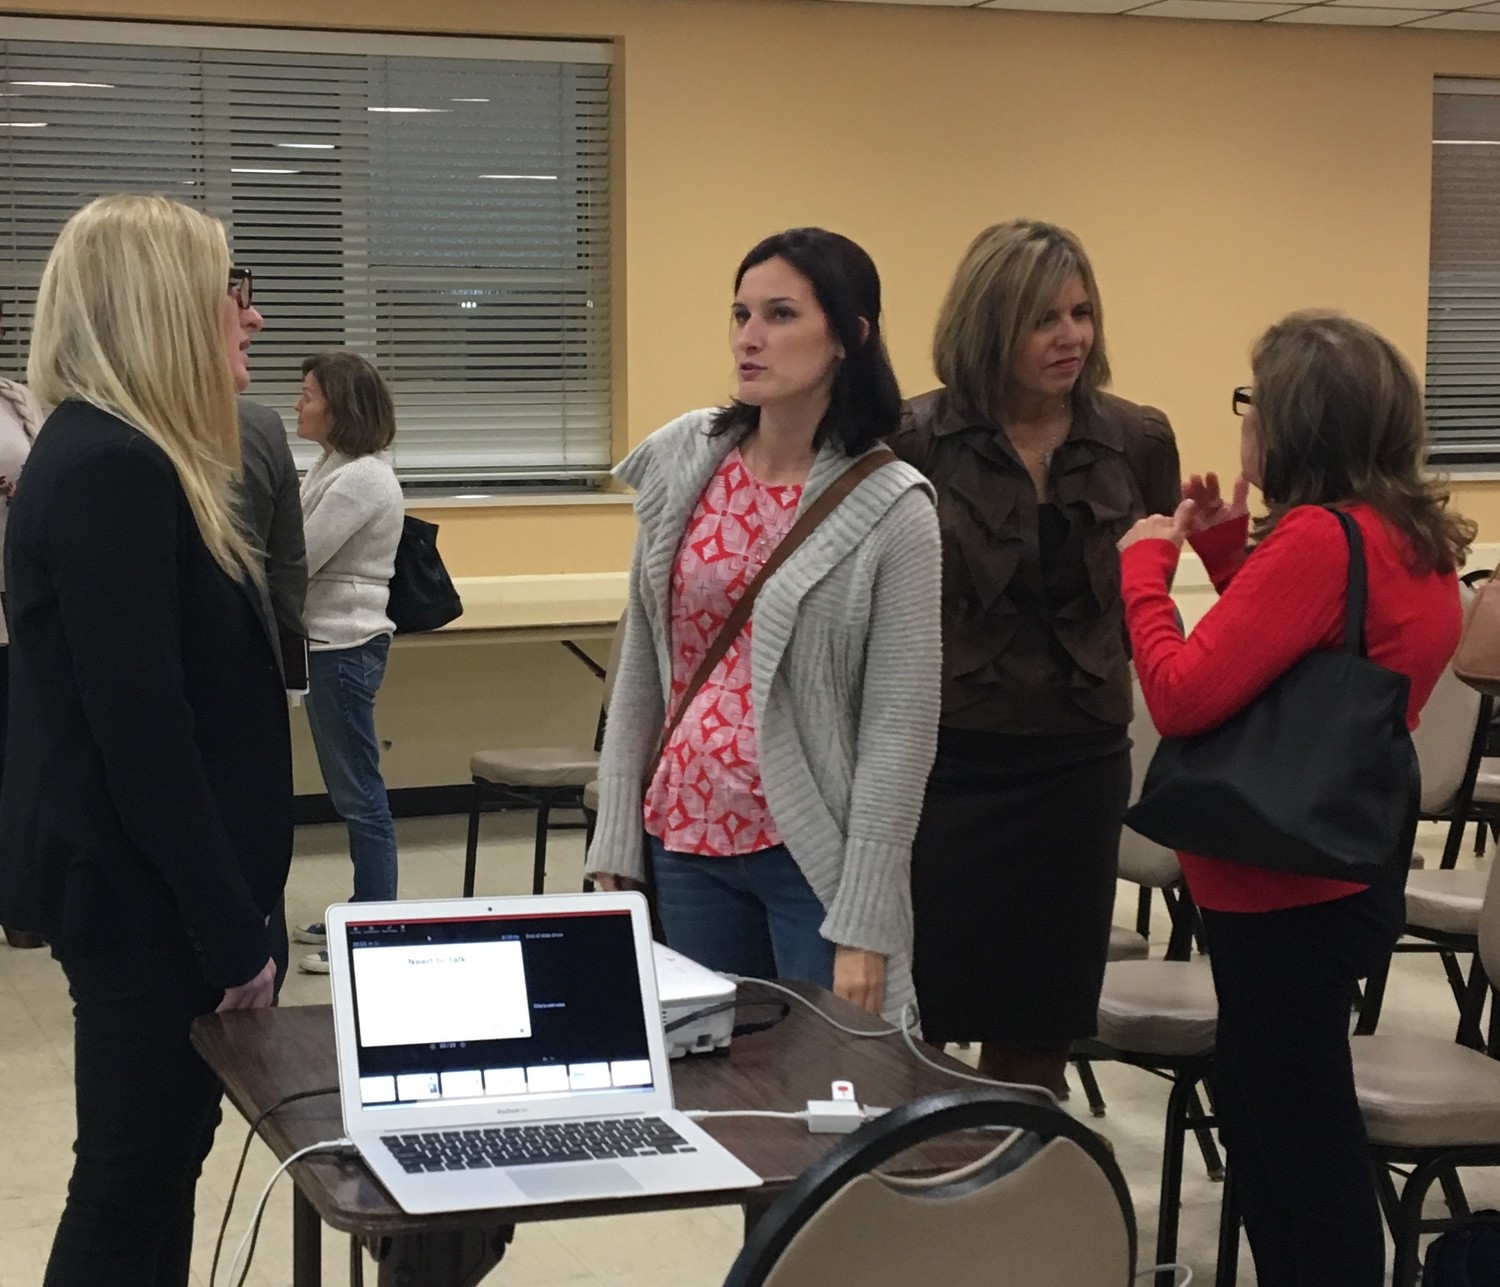 Reisa Berg, far left, and Linda Ventura, second from right, spoke with community members about the importance of prevention at CASA’s meeting on Monday night.